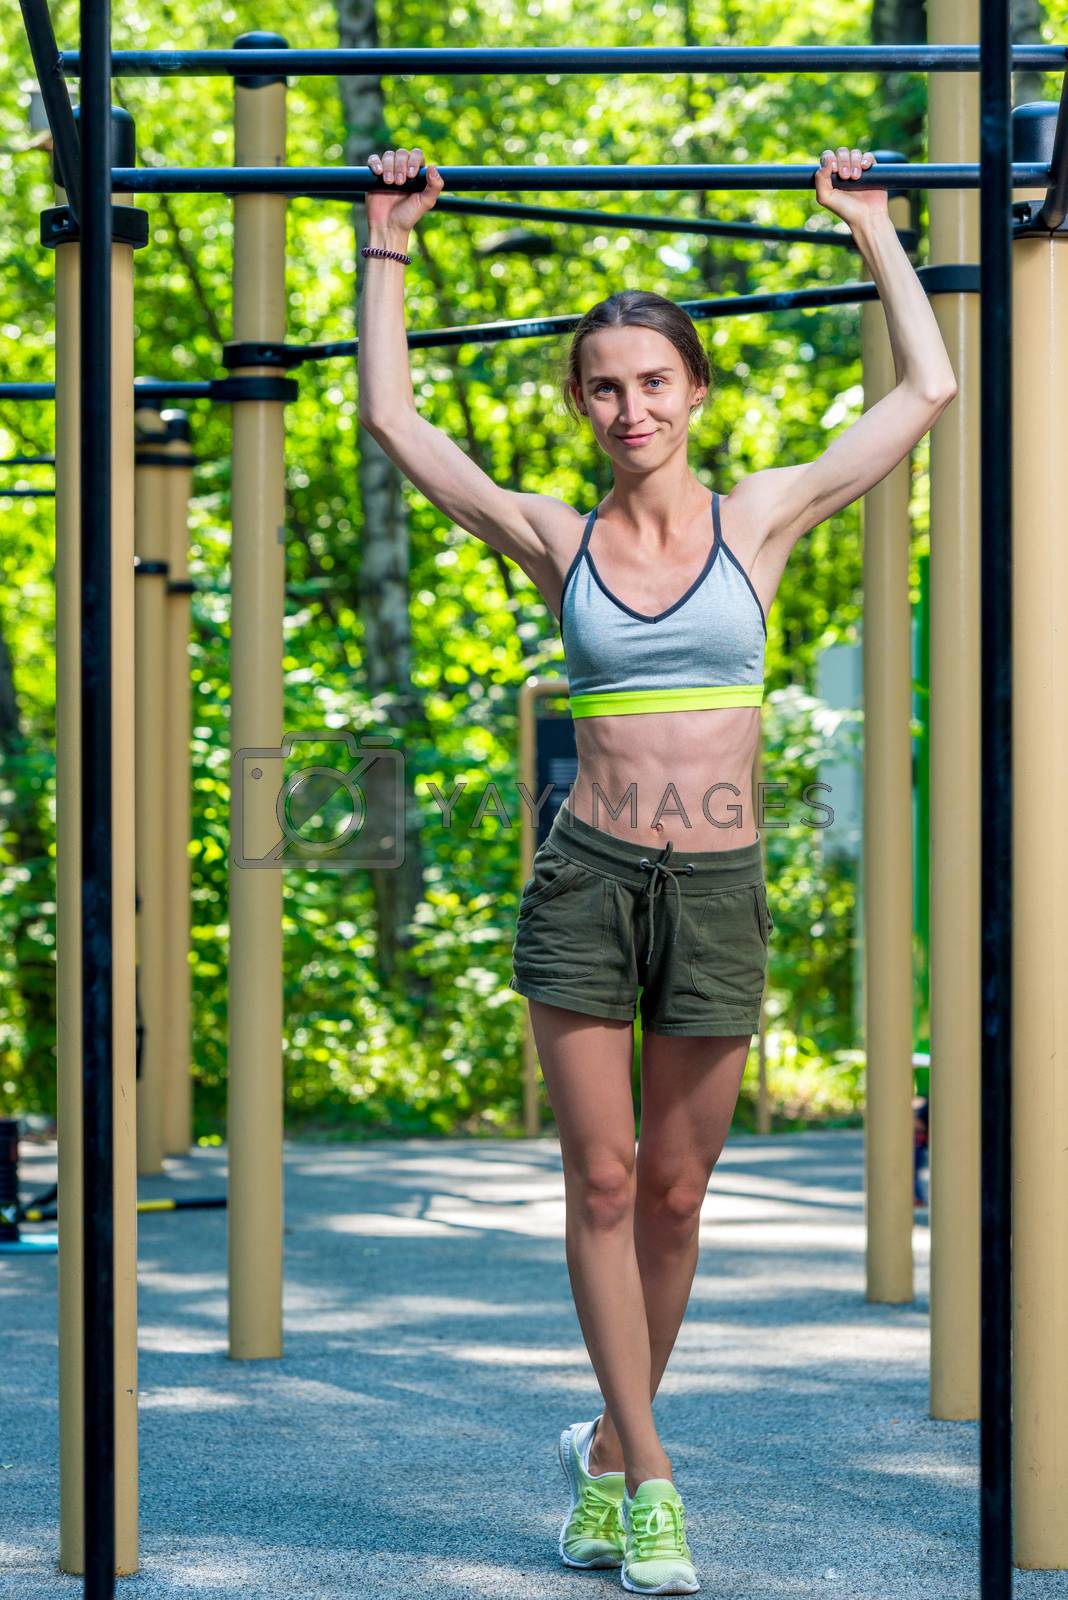 Royalty free image of slender muscular woman posing at the gym in the park during trai by kosmsos111